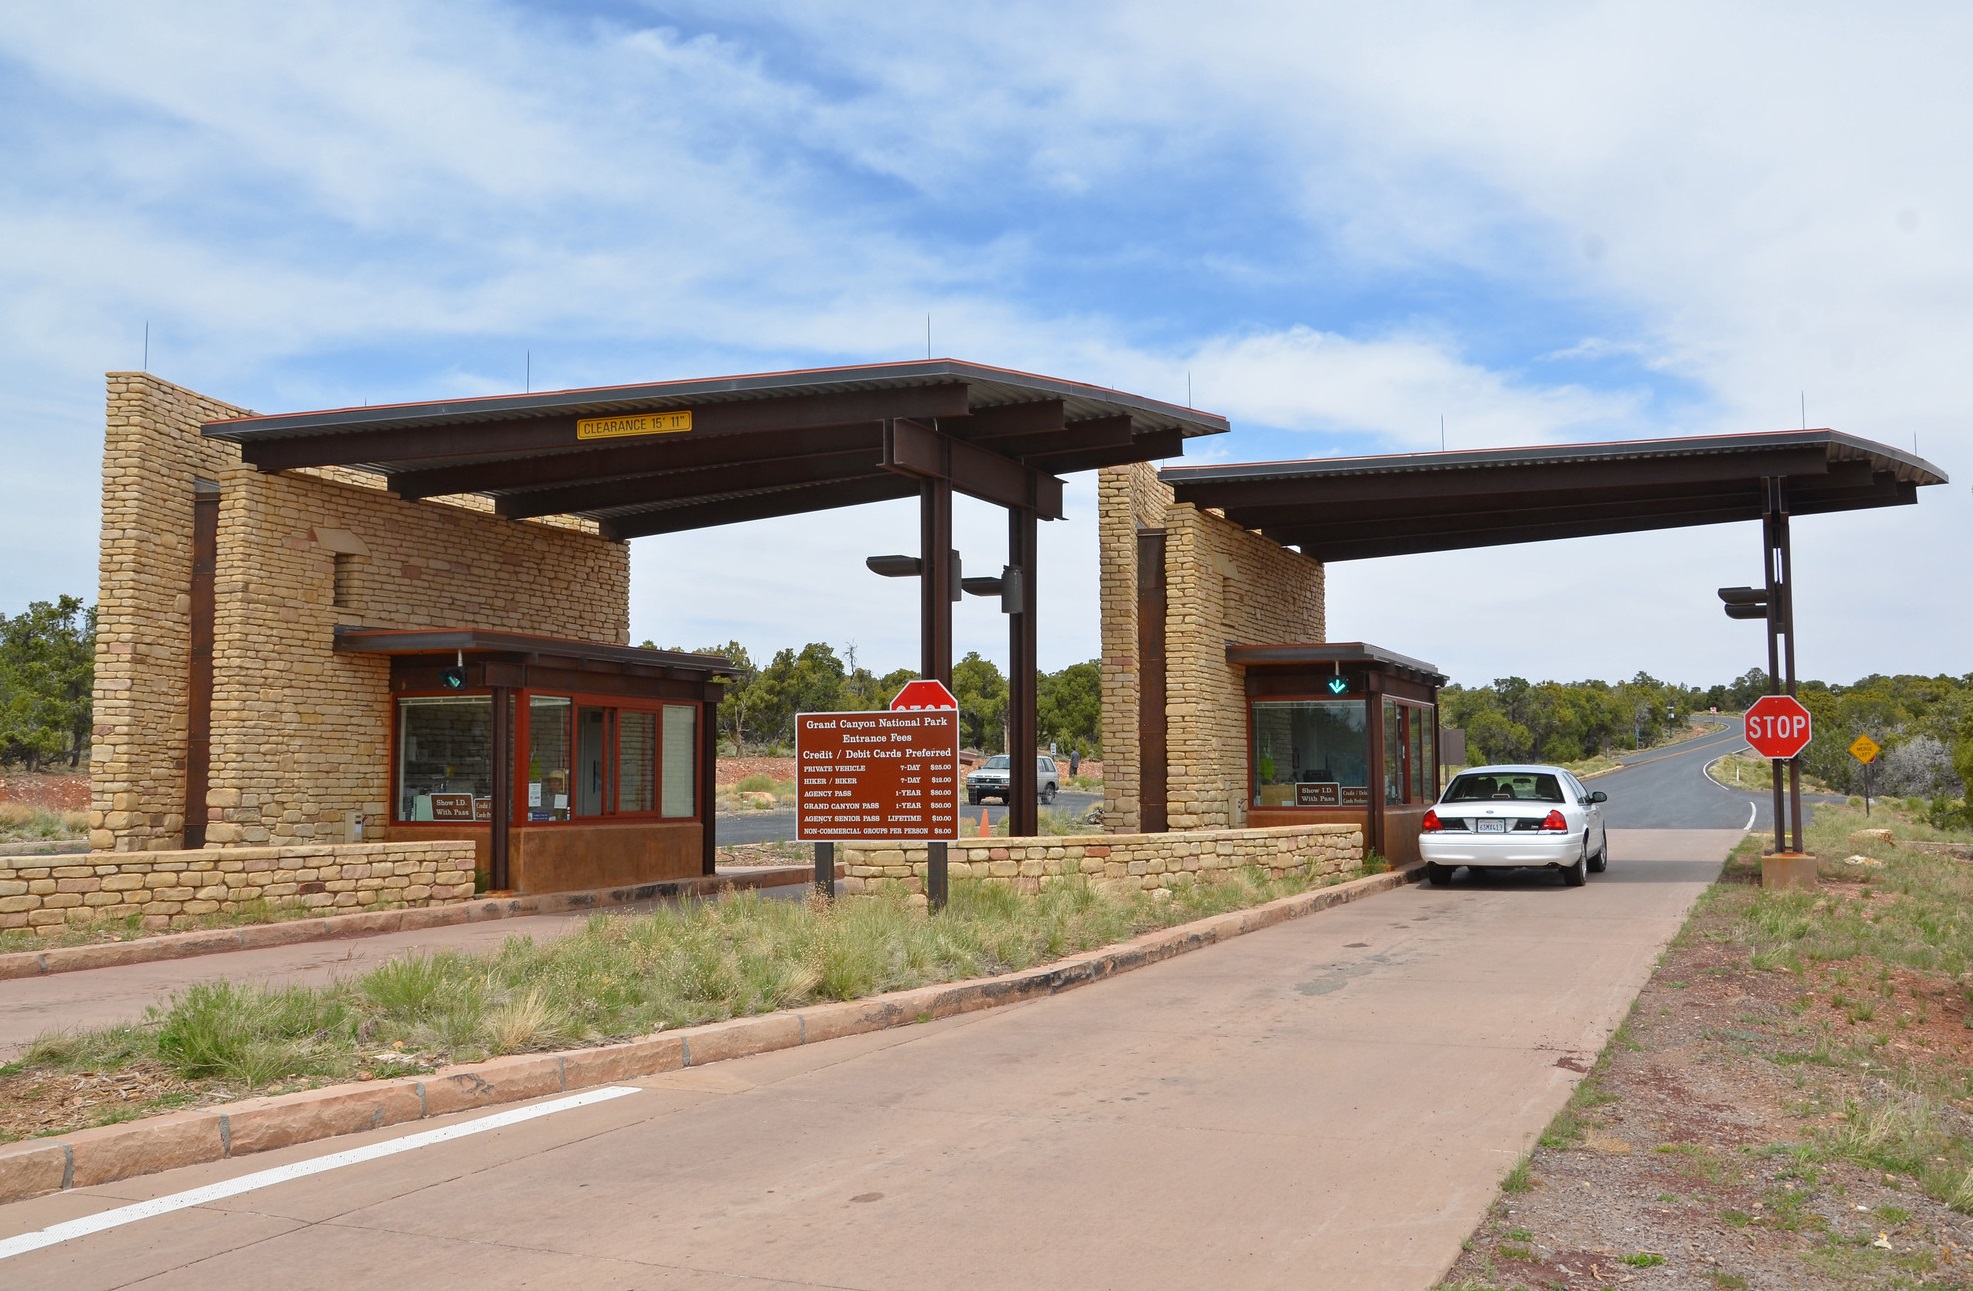 A car pulls up to the East Entrance gate at Grand Canyon National Park.